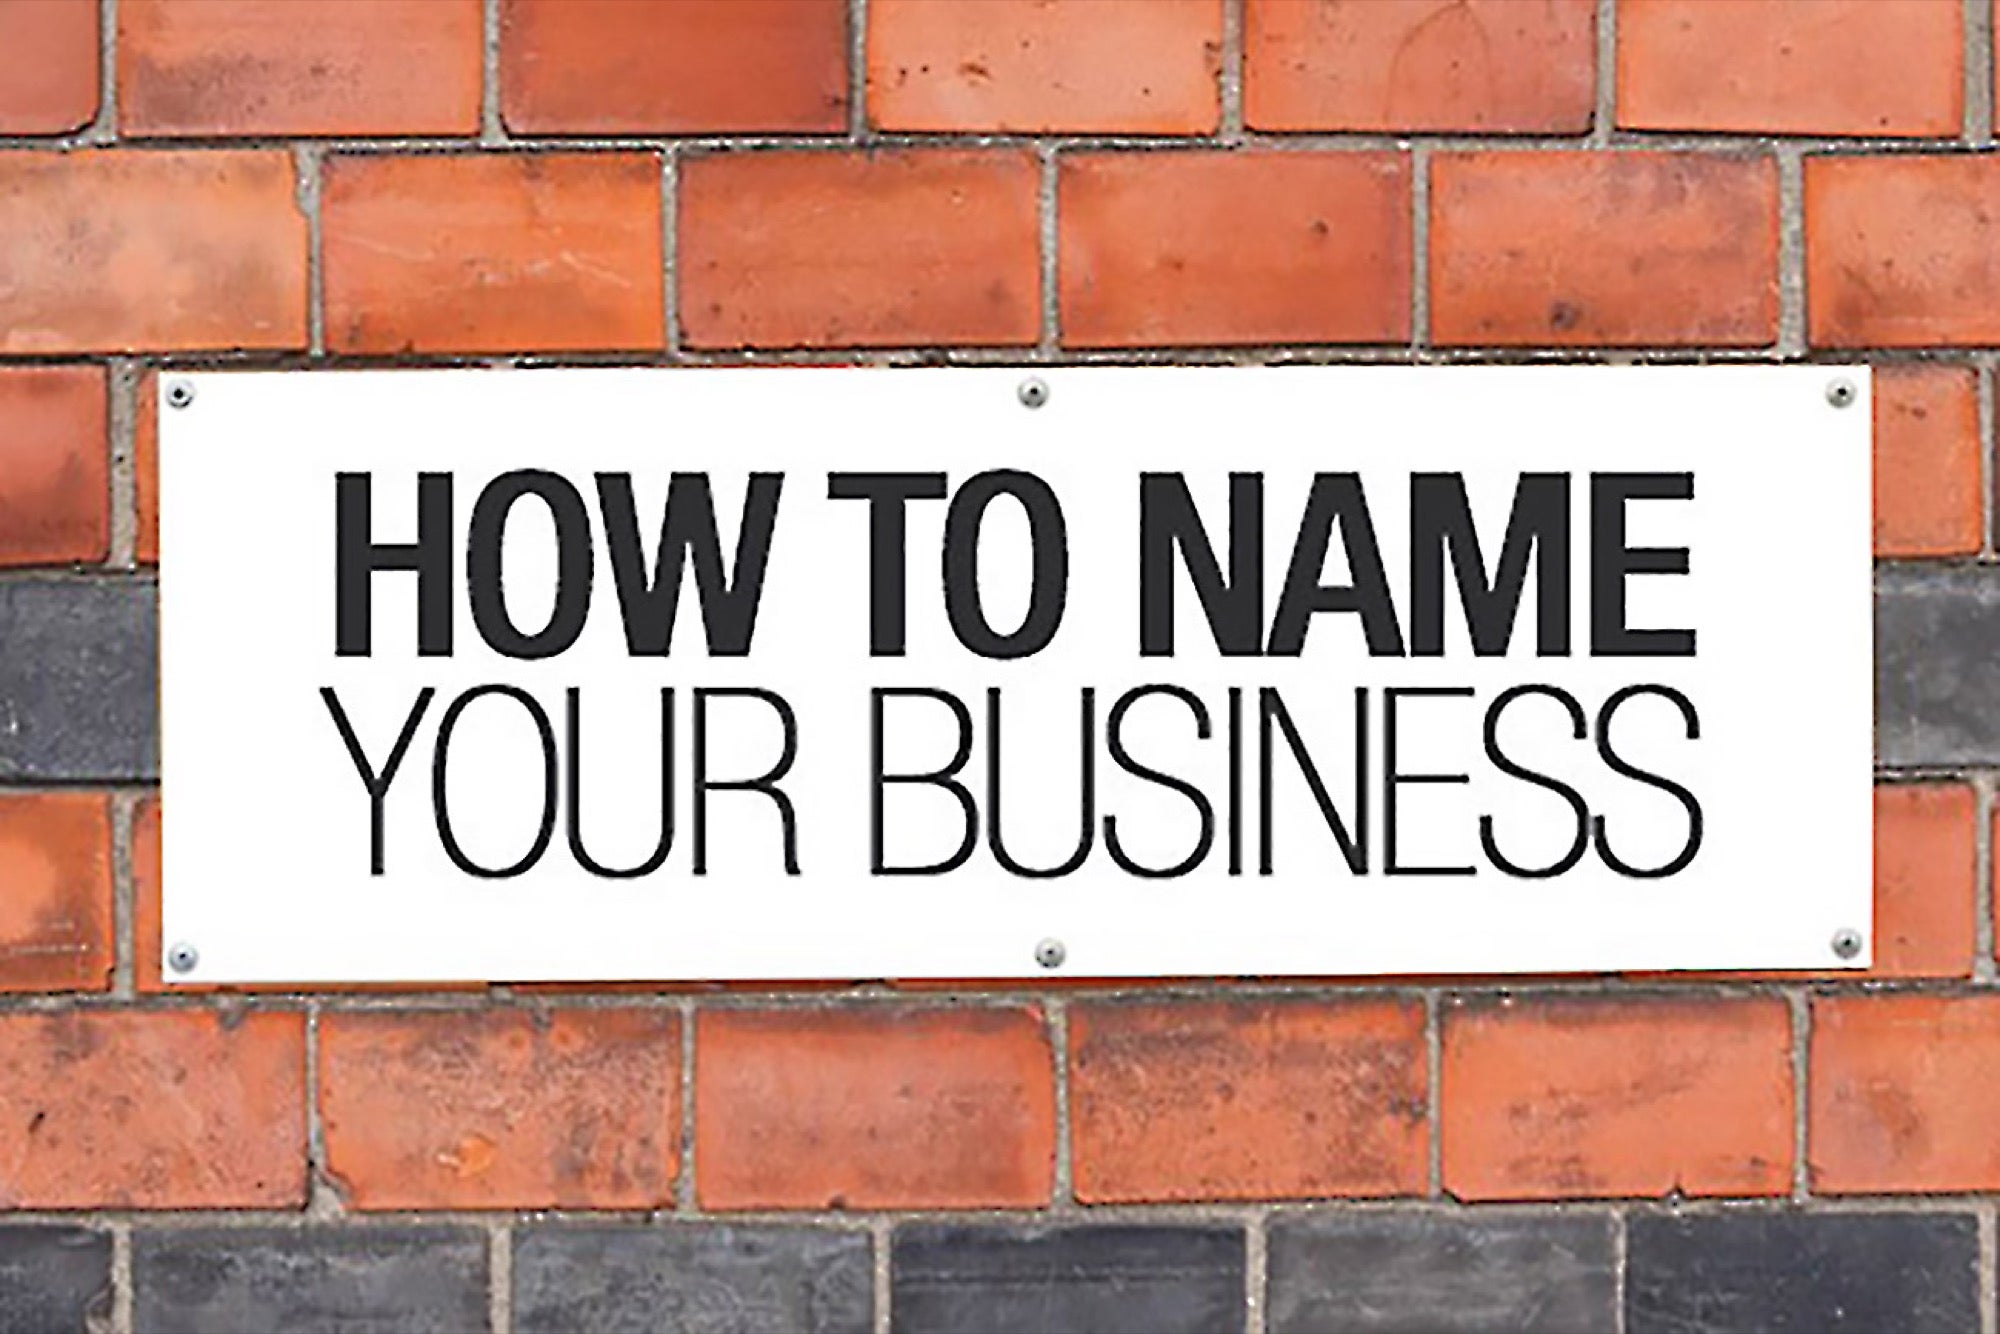 A Branding Agency Helps Build Your Business Name